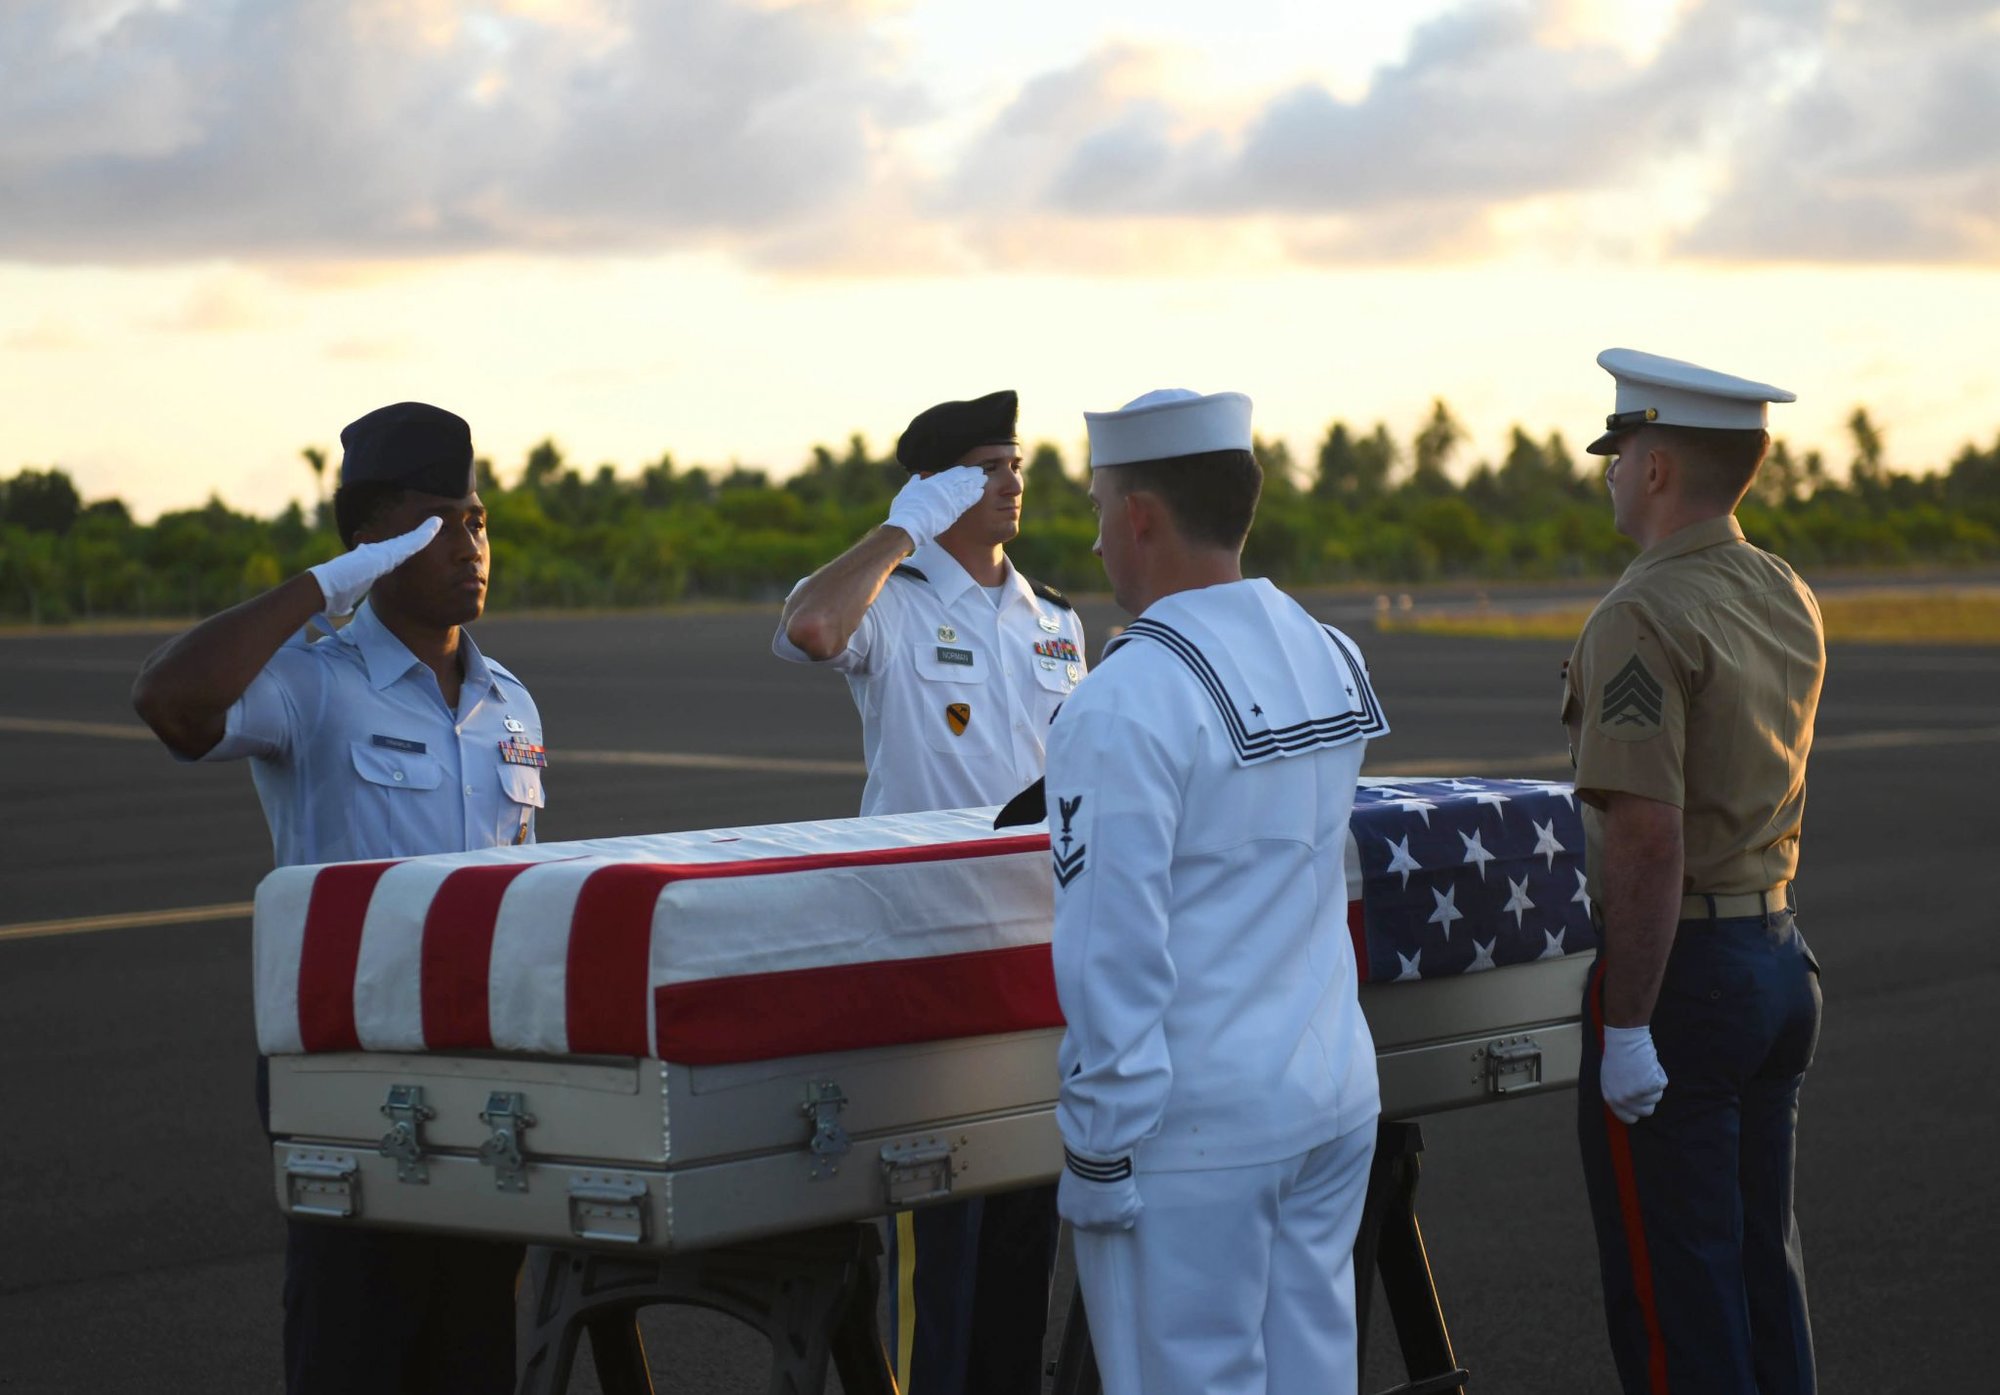 Joint service members assigned to the Defense POW/MIA Accounting Agency (DPAA), render honors during a repatriation ceremony in Tarawa, Republic of Kiribati Sept. 28, 2019. DPAA, in cooperation with History Flight, Inc., repatriated 12 sets of remains believed to be those of American service members who went missing in WWII. DPAA’s mission is to provide the fullest possible accounting of our missing personnel to their families and the nation. (U.S. Navy photo by Mass Communication Specialist 1st Class Amara Timberlake)